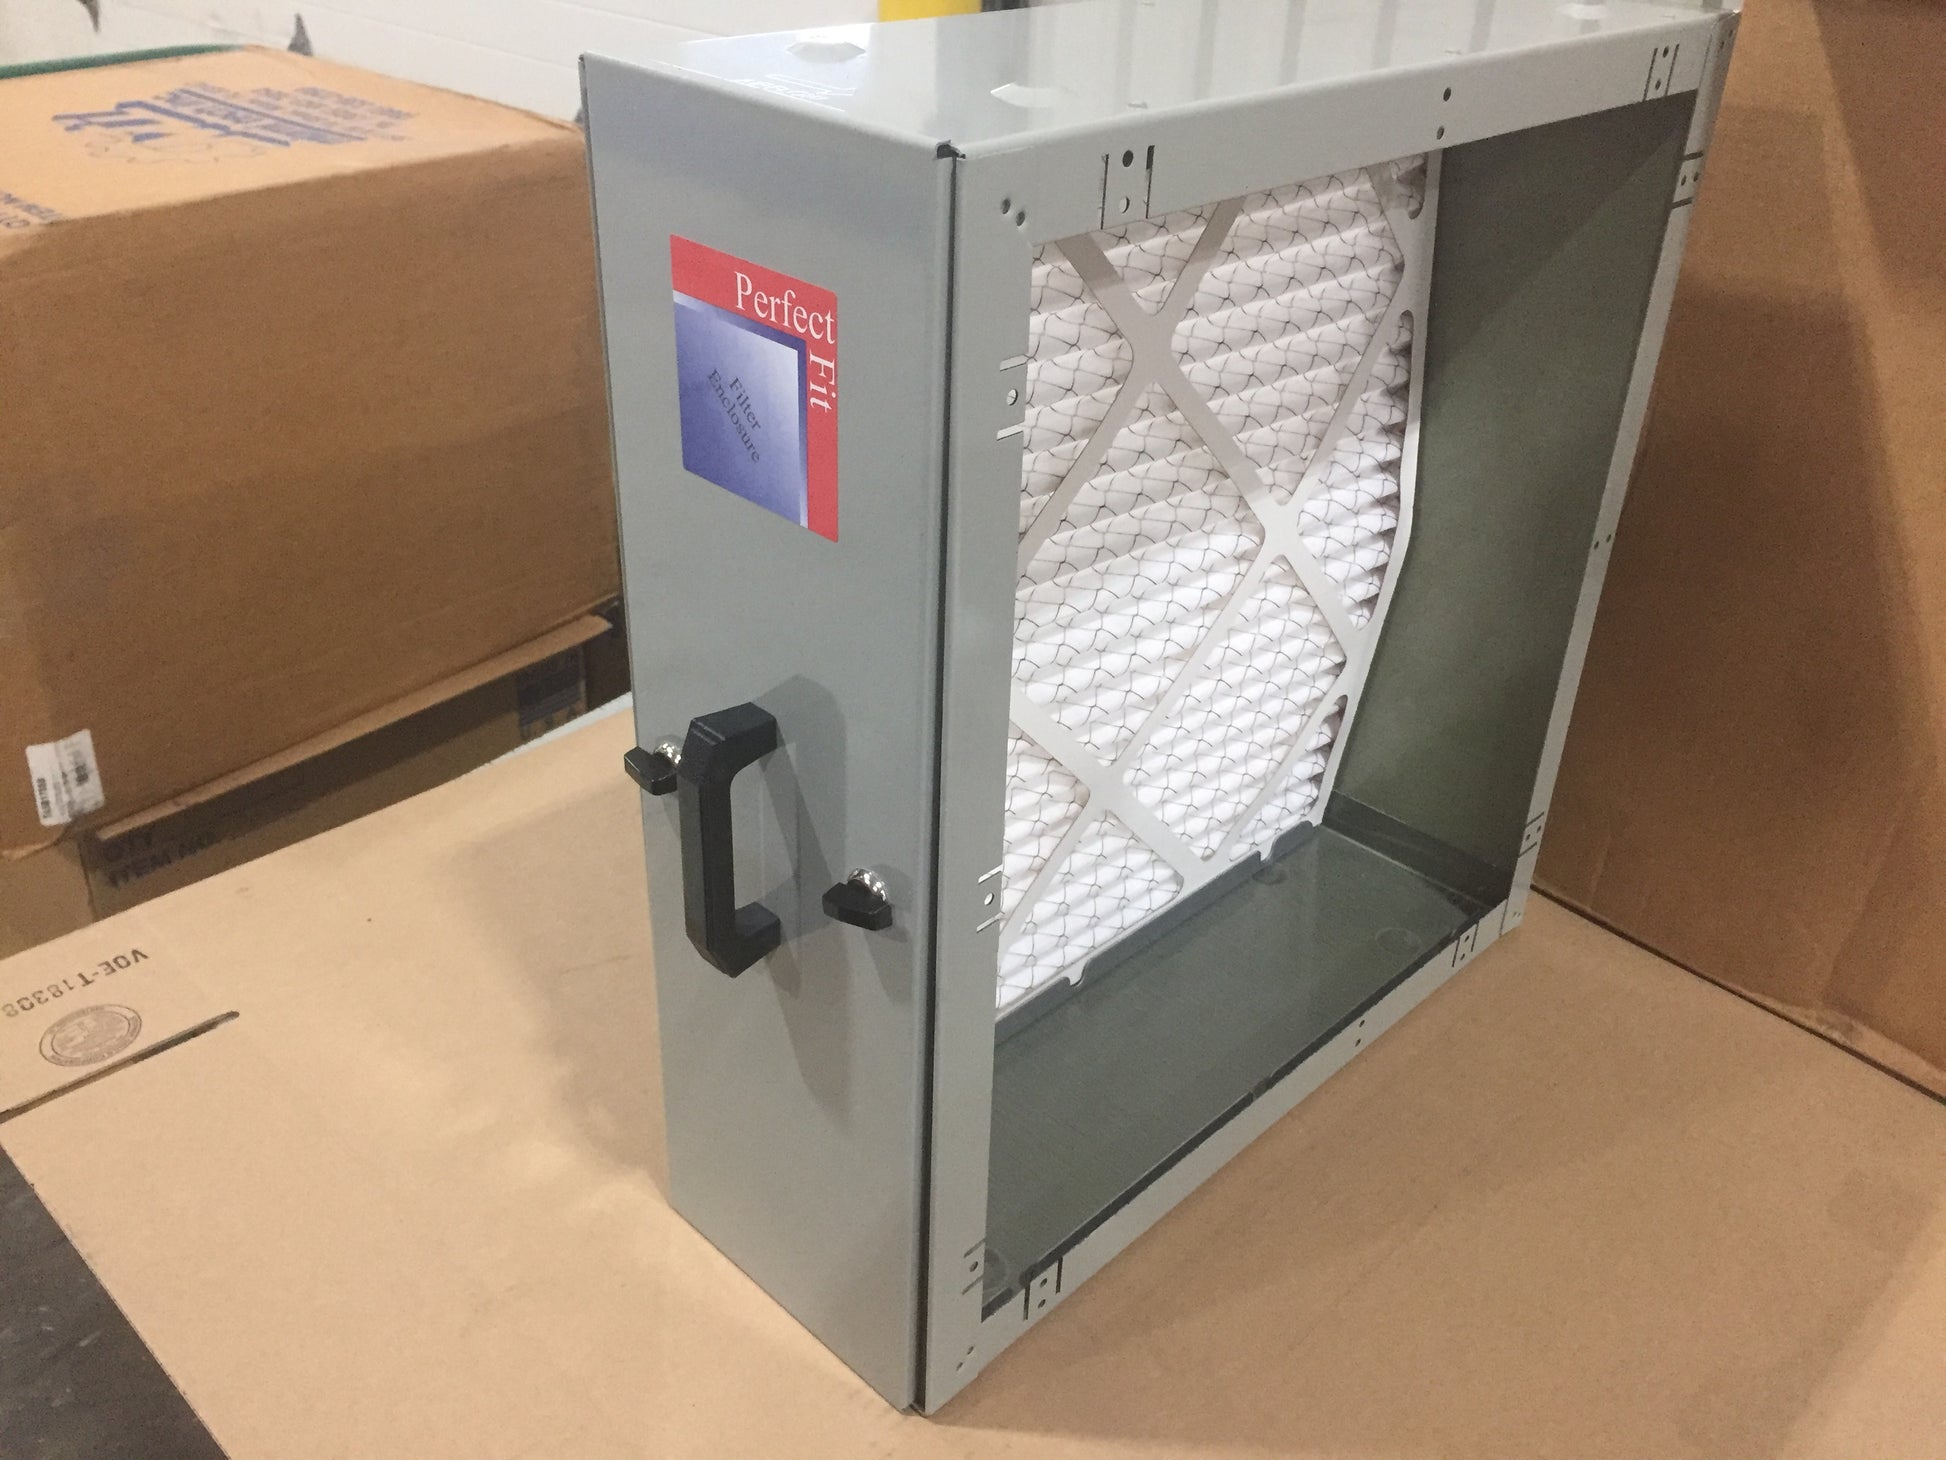 21" x 21" PERFECT FIT AIR HANDLER MEDIUM EFFICIENCY AIR CLEANER WITH 1 INCH PLEATED FILTER